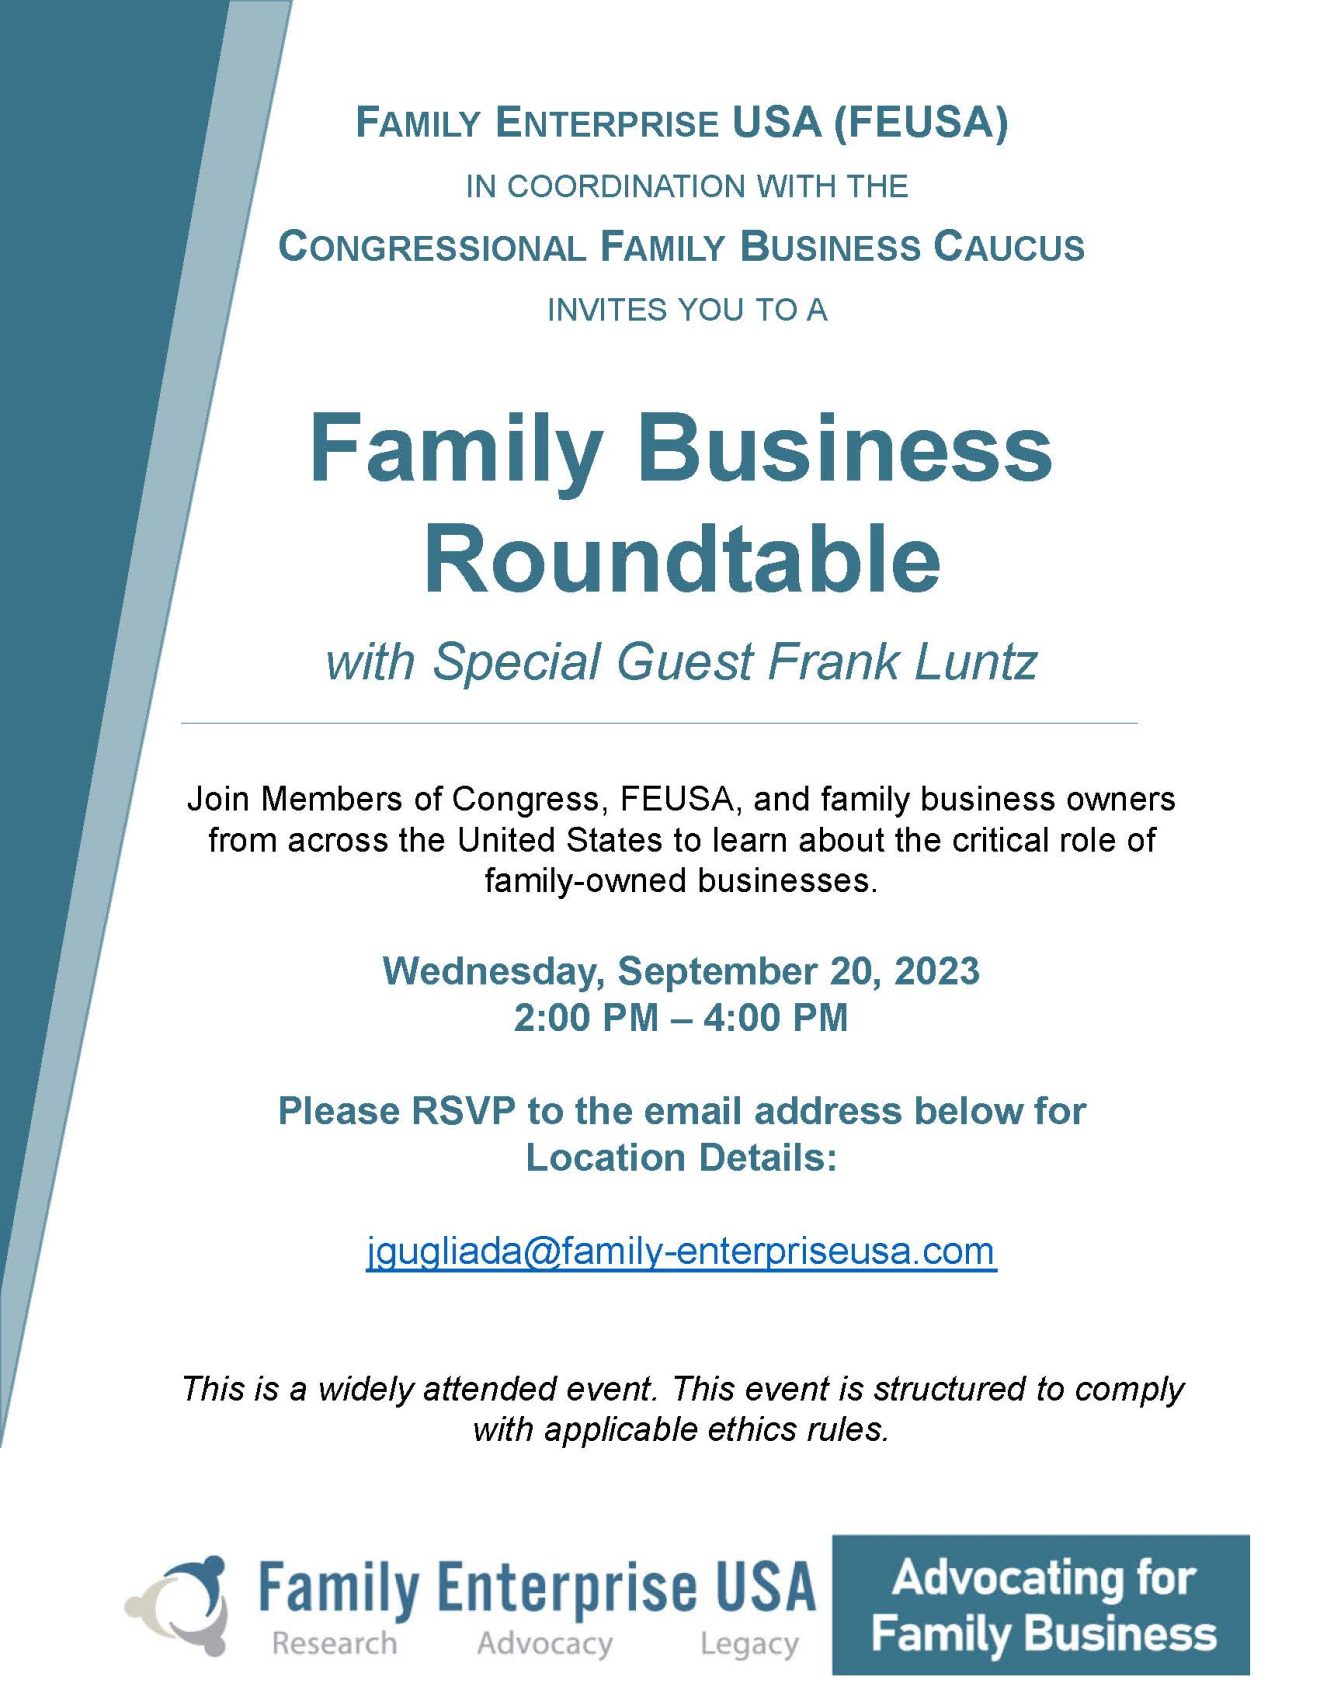 RSVP for Family Business Roundtable with Special Guest Frank Luntz